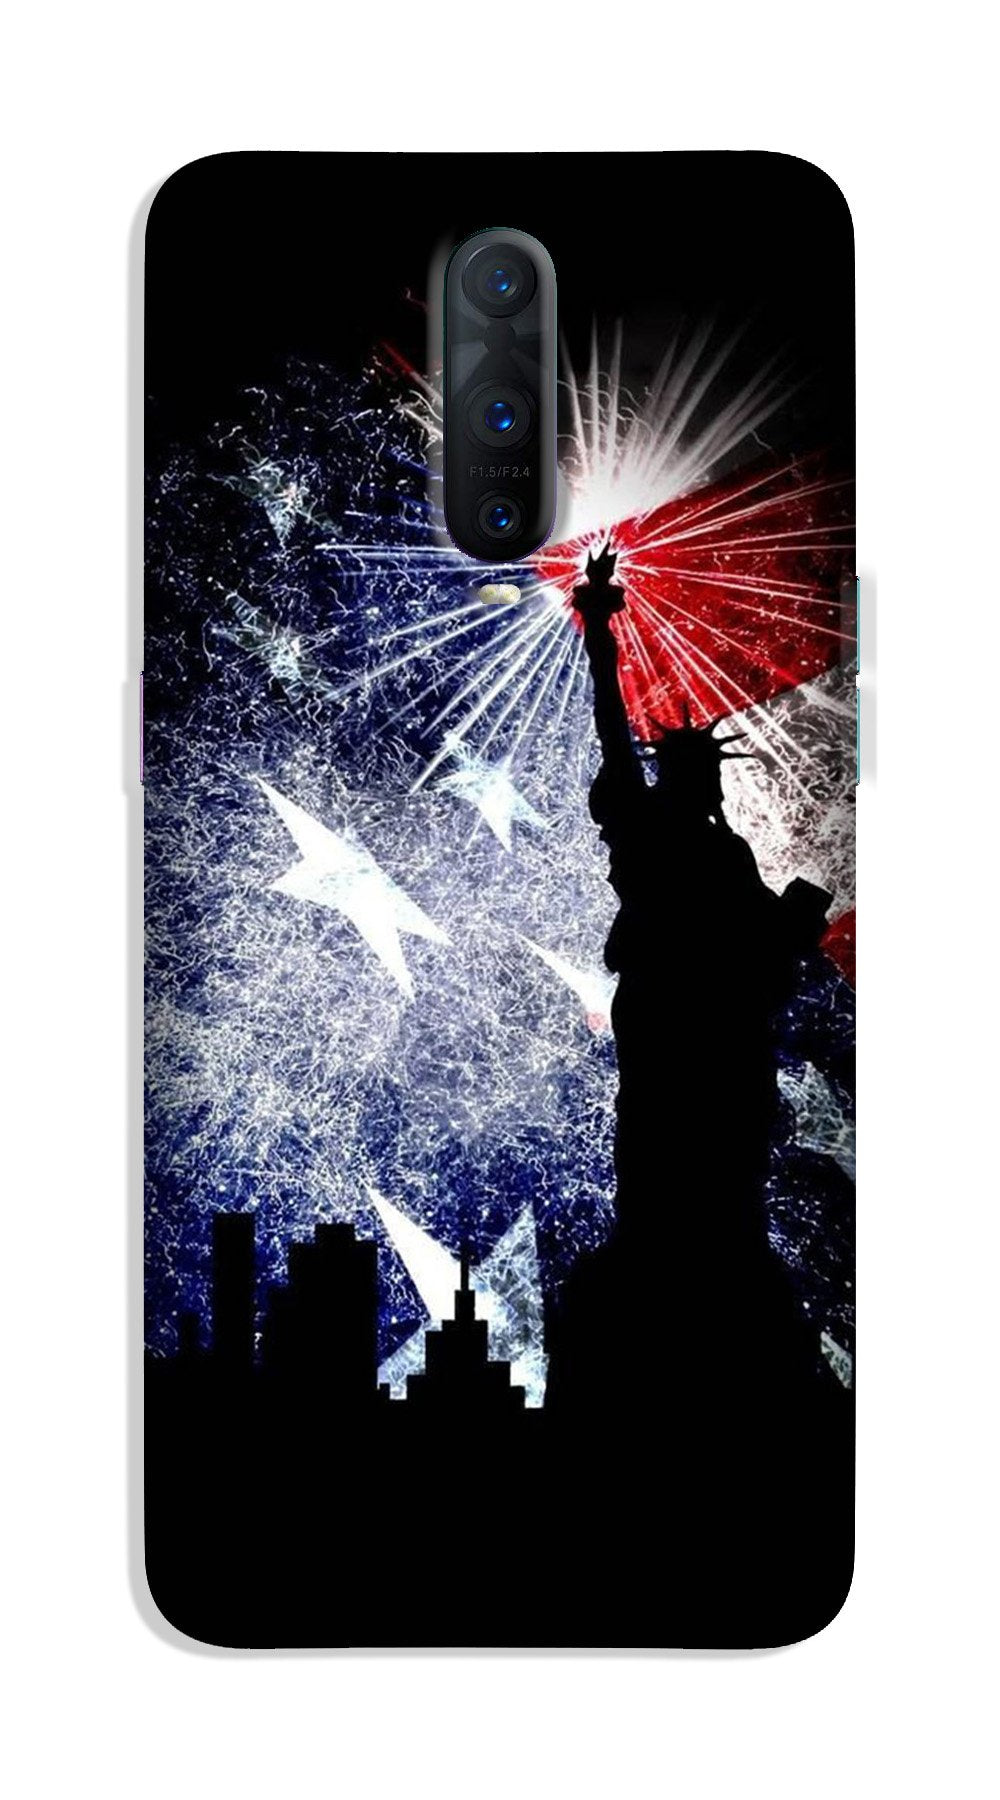 Statue of Unity Case for OnePlus 7 Pro (Design No. 294)